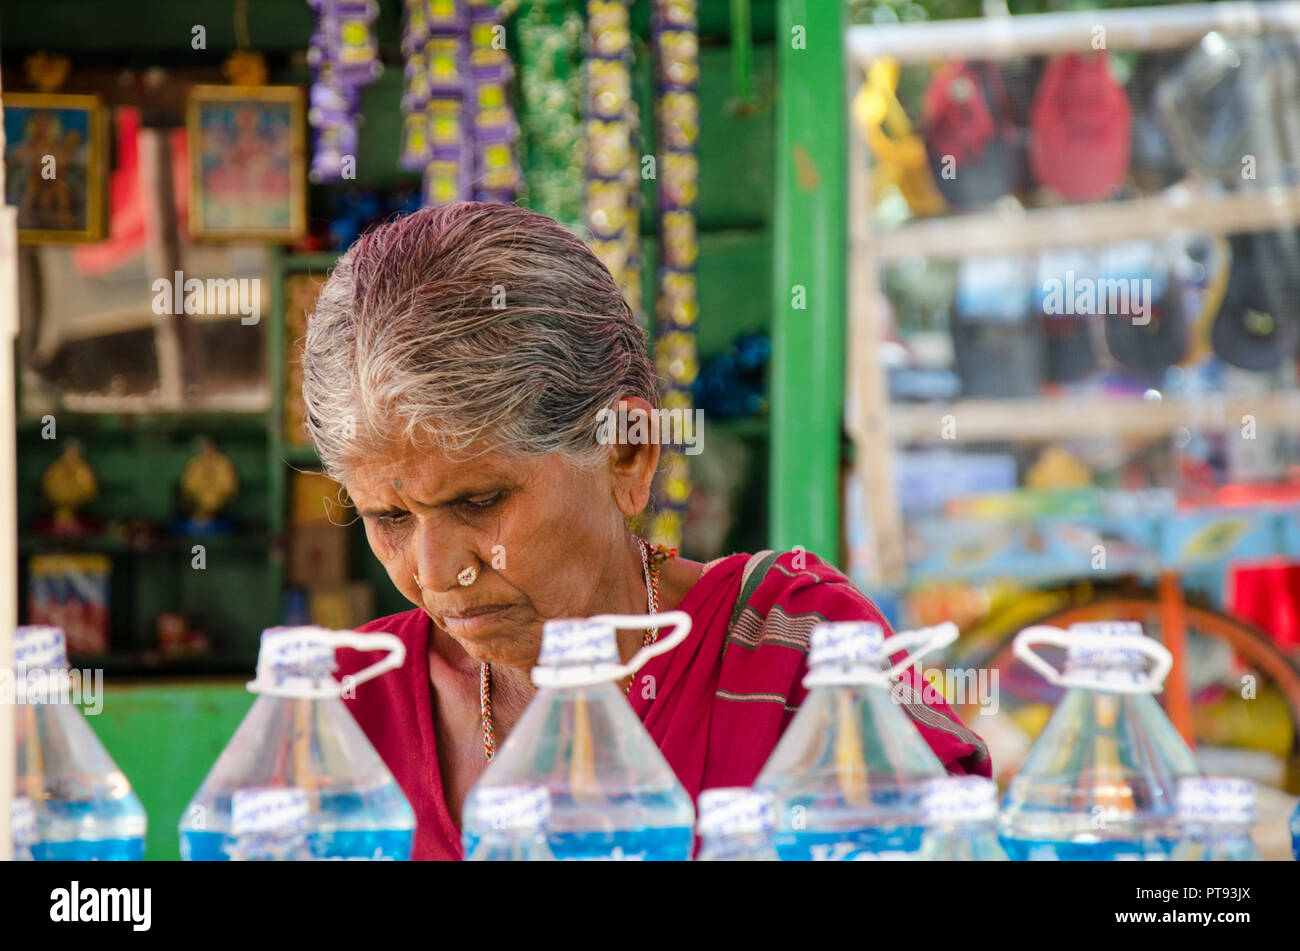 Close-up portrait of a local elderly woman working in her stall selling water bottles and other items at Hampi, Karnataka, India. Stock Photo